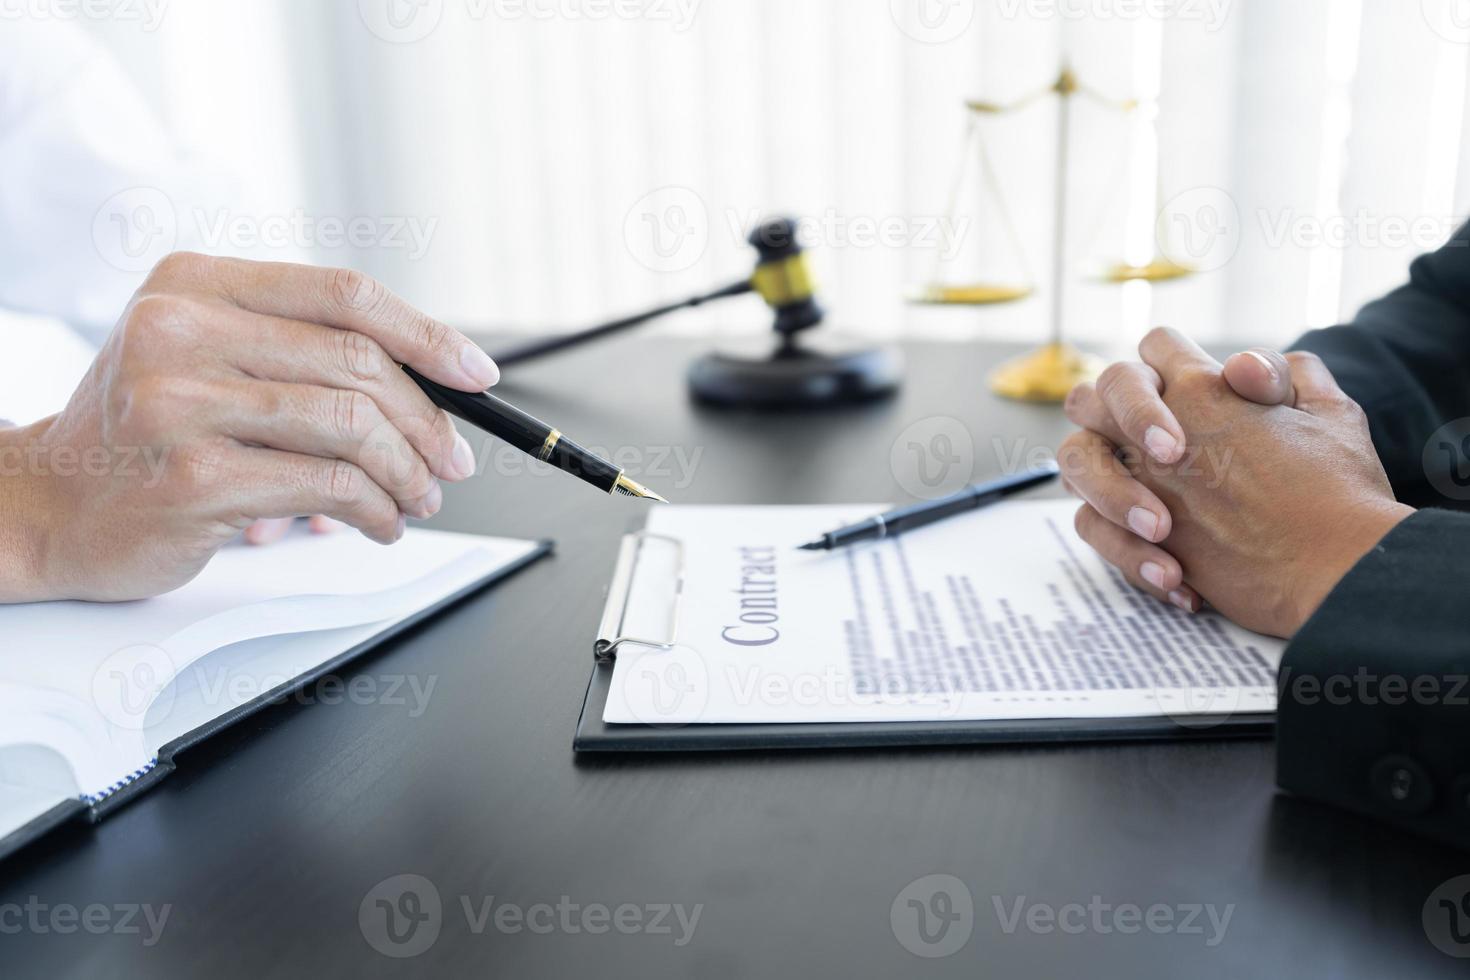 law,libra scale and hammer on the table, 2 lawyers are discussing about contract paper, law matters determination photo